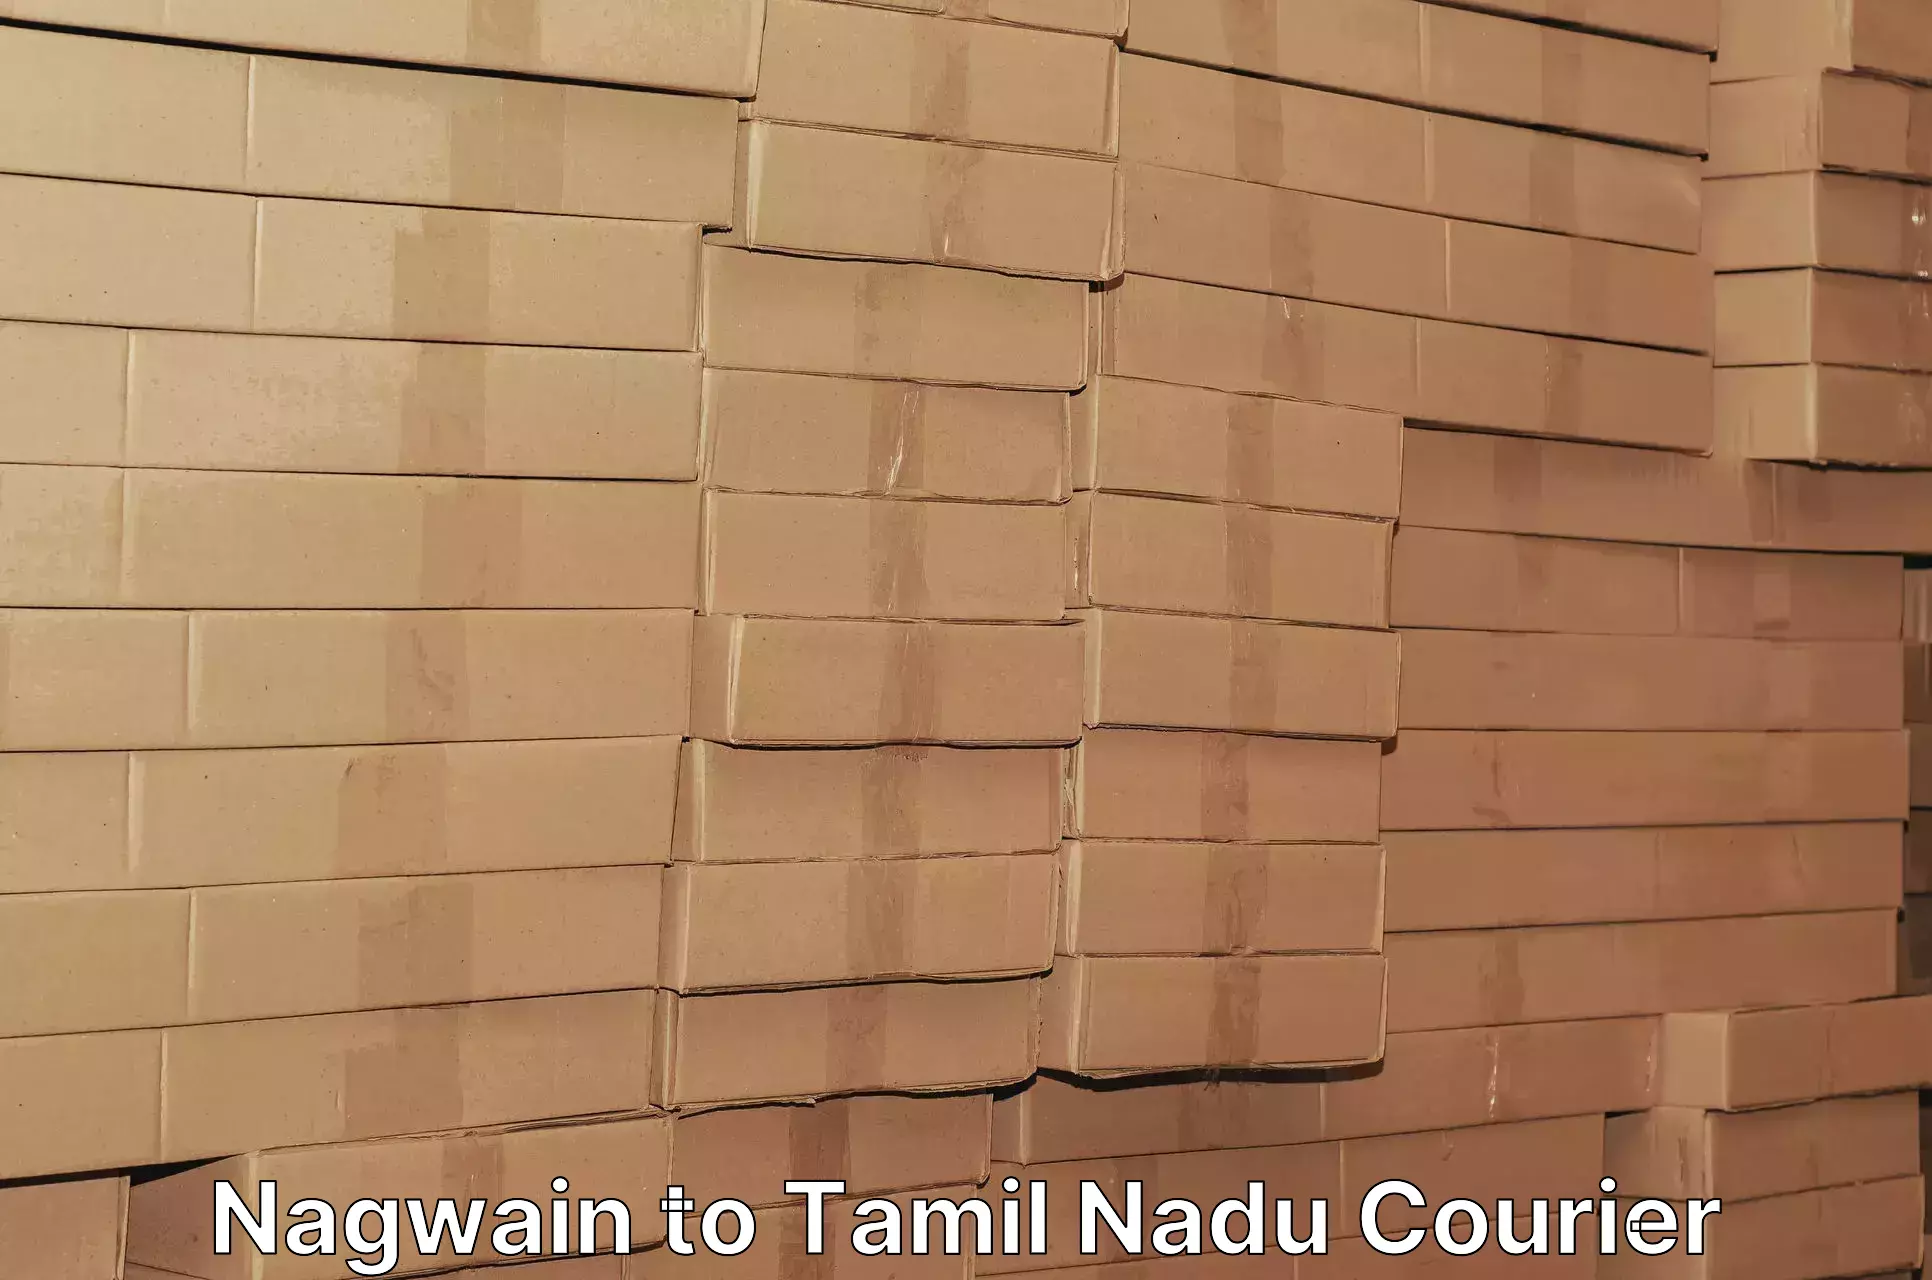 Large package courier Nagwain to Ennore Port Chennai